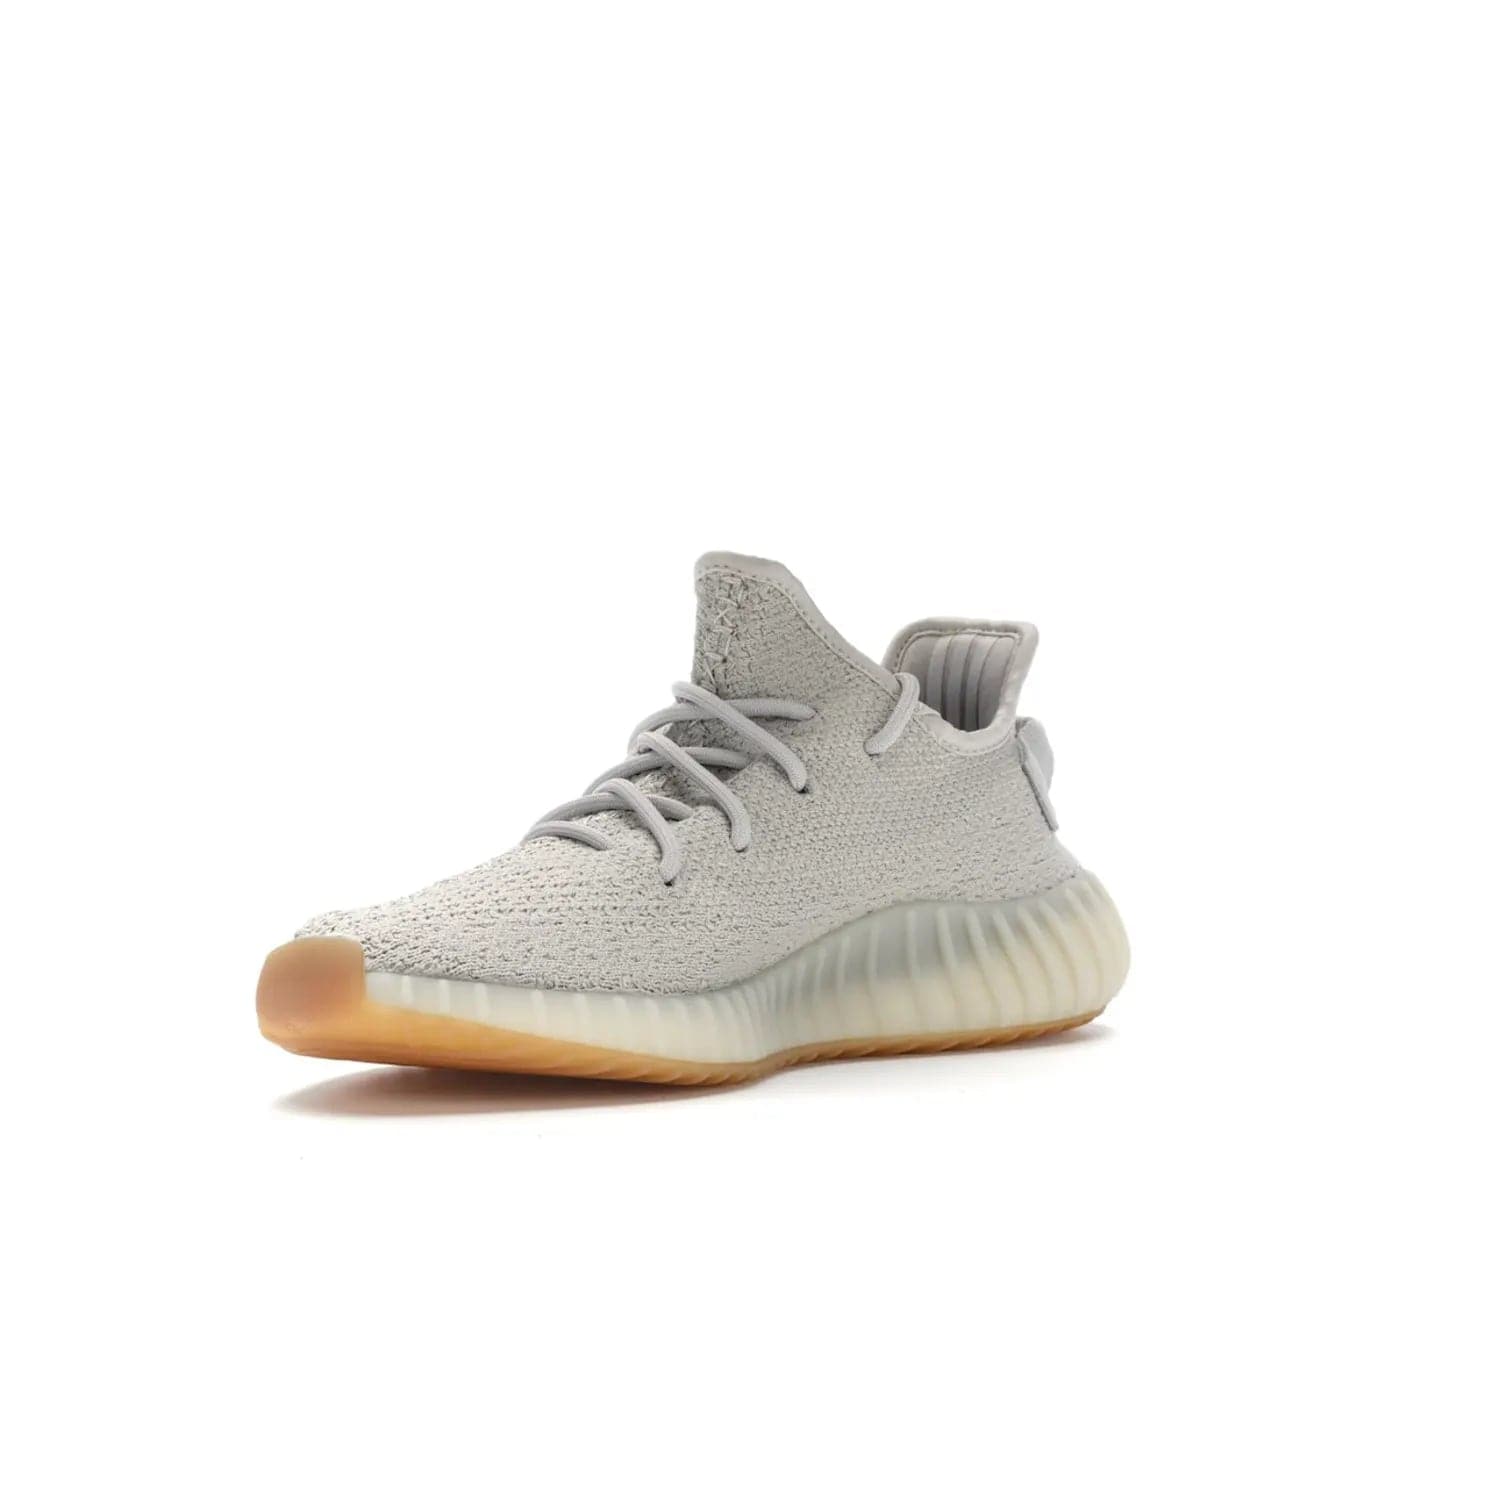 adidas Yeezy Boost 350 V2 Sesame - Image 15 - Only at www.BallersClubKickz.com - Introducing the adidas Yeezy Boost 350 V2 Sesame. Featuring a sesame upper, midsole and gum sole for a sleek silhouette. Cop the stylish sneaker released in November 2018.